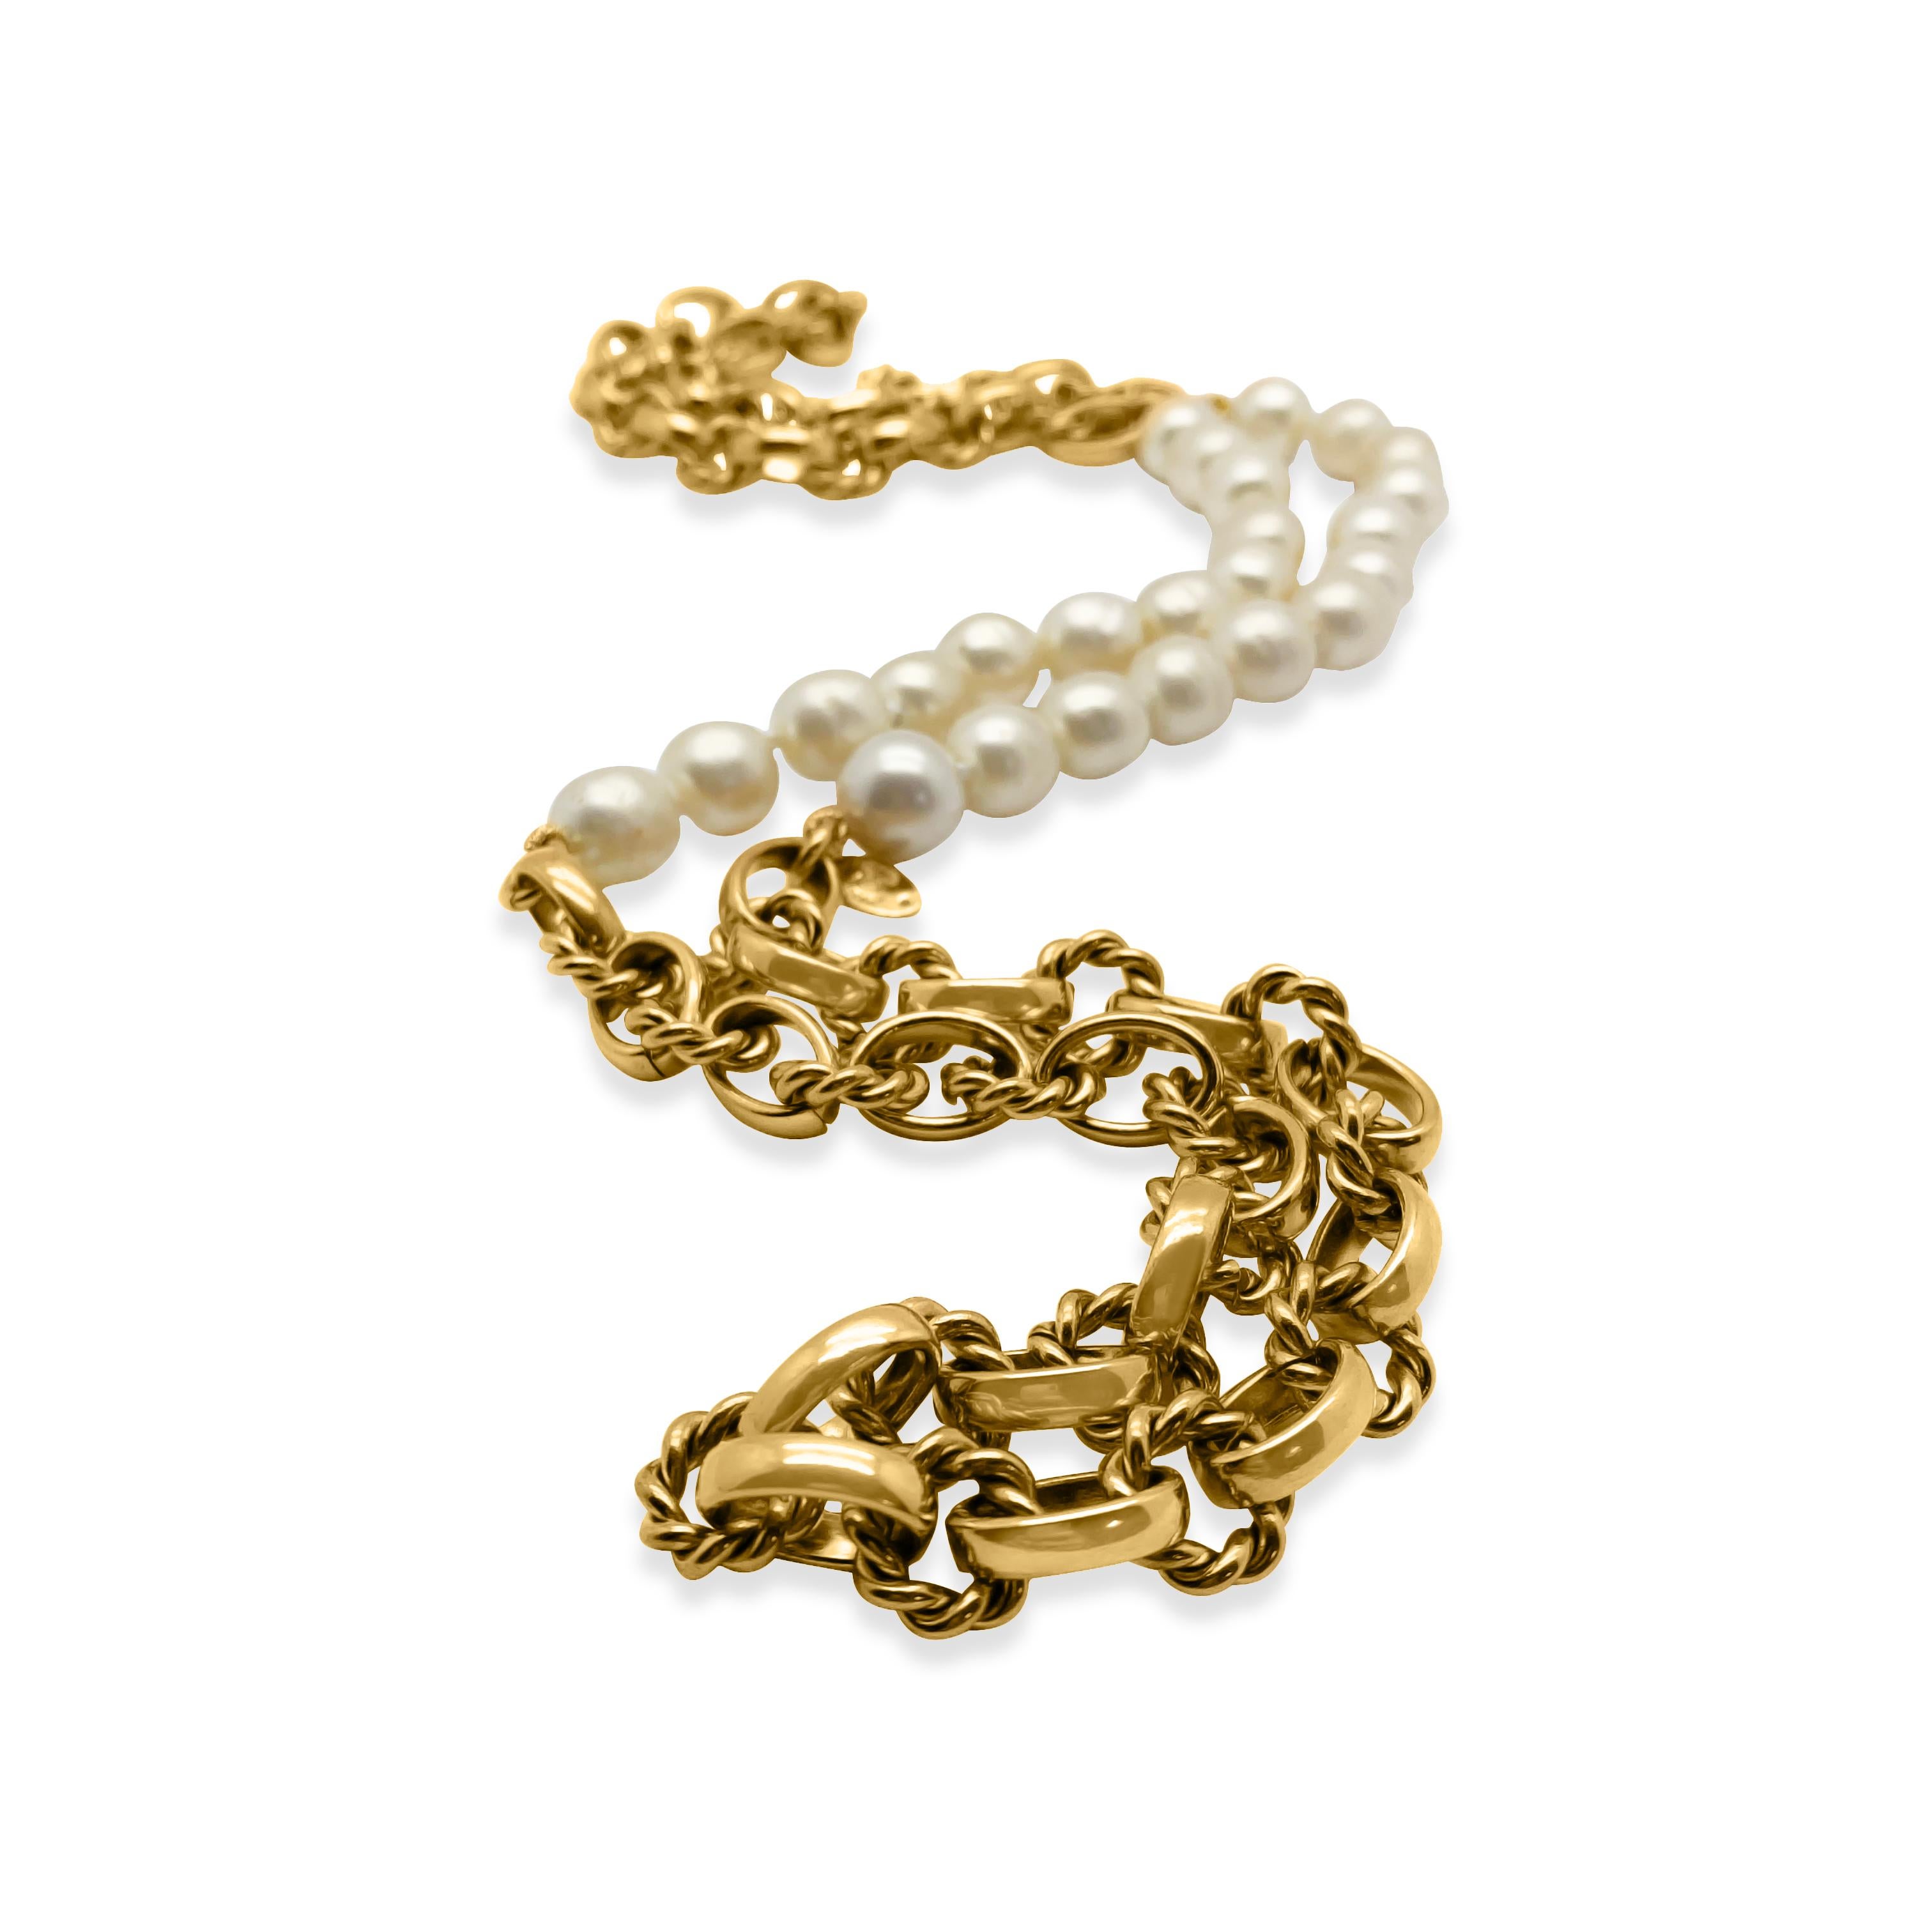 The quintessential Chanel Pearl Chain Necklace. Originating from 1983, the year Lagerfeld joined the house. Crafted in gold plated metal and glass baroque style simulated pearls. Featuring a long, elaborate chunky gold chain with twin pearl stations